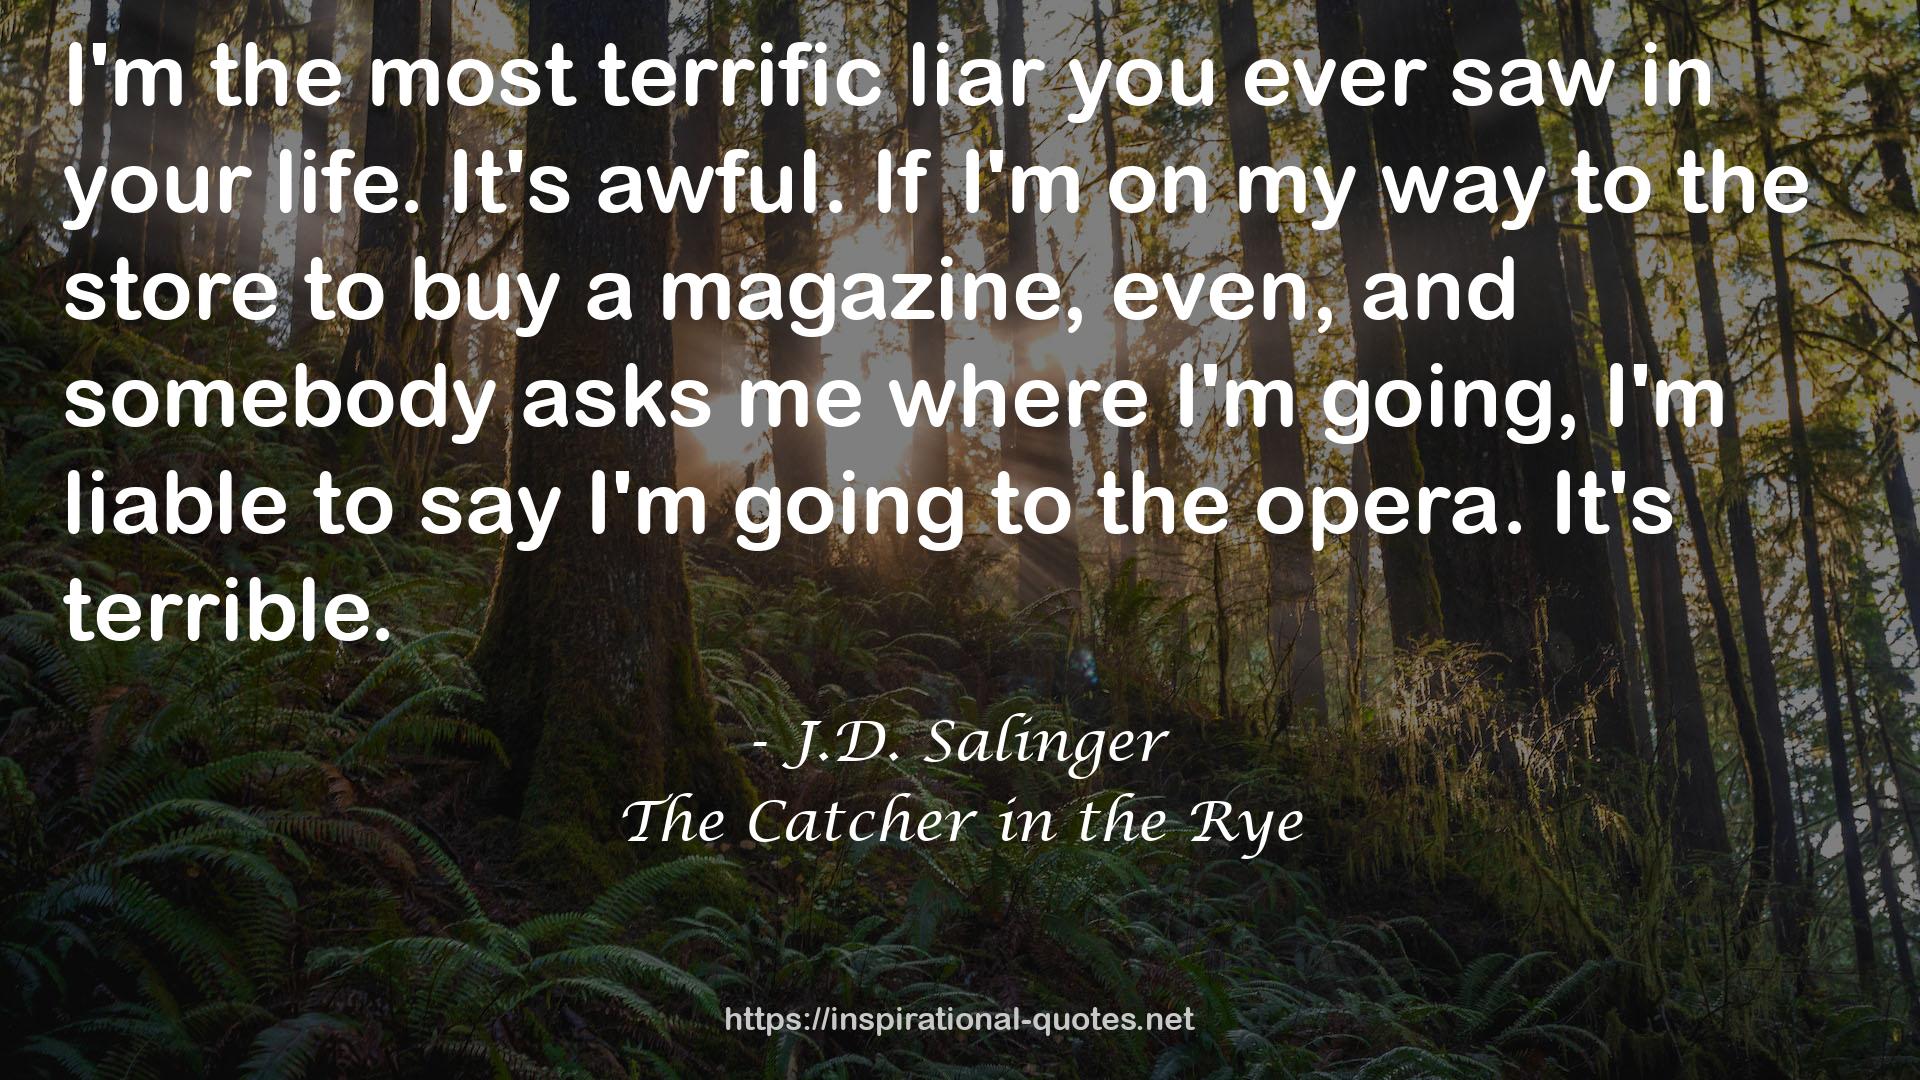 The Catcher in the Rye QUOTES